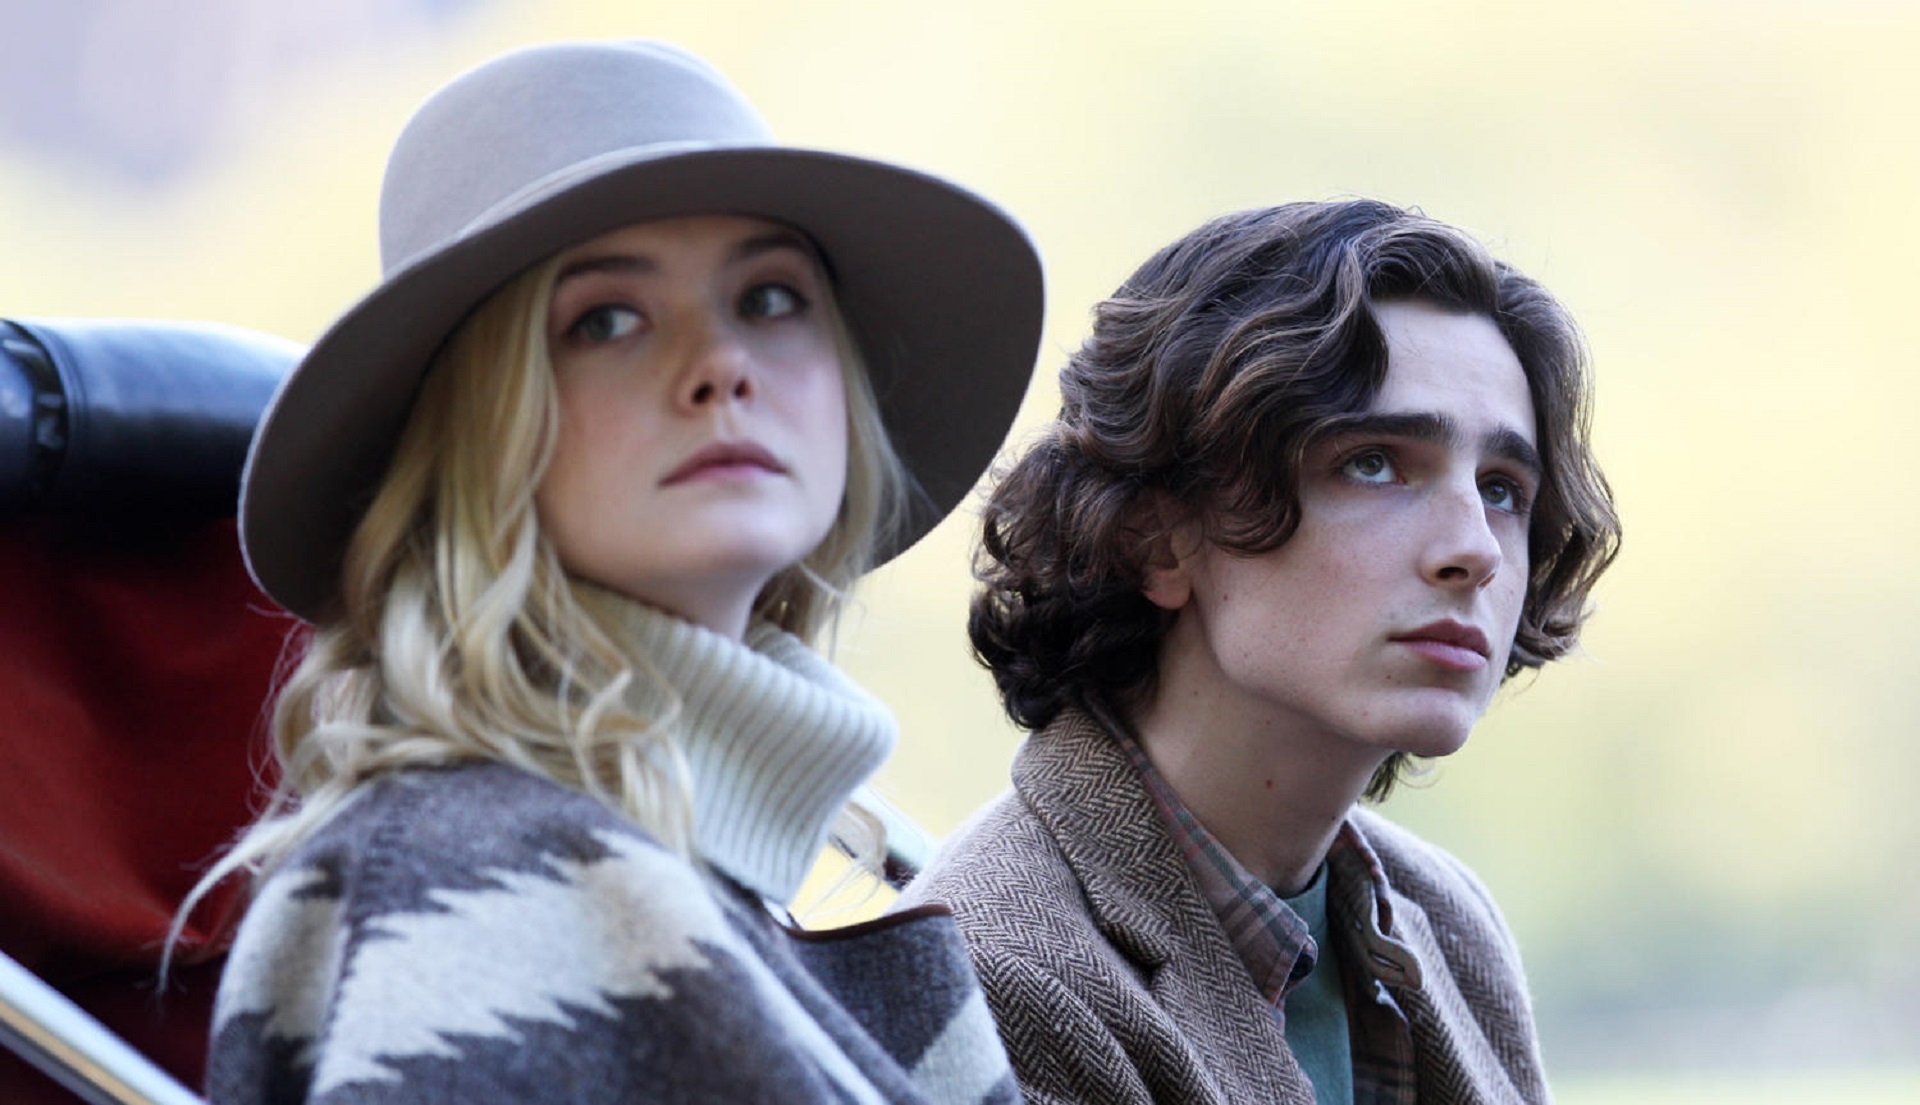 Elle Fanning in "A Rainy Day in New York"